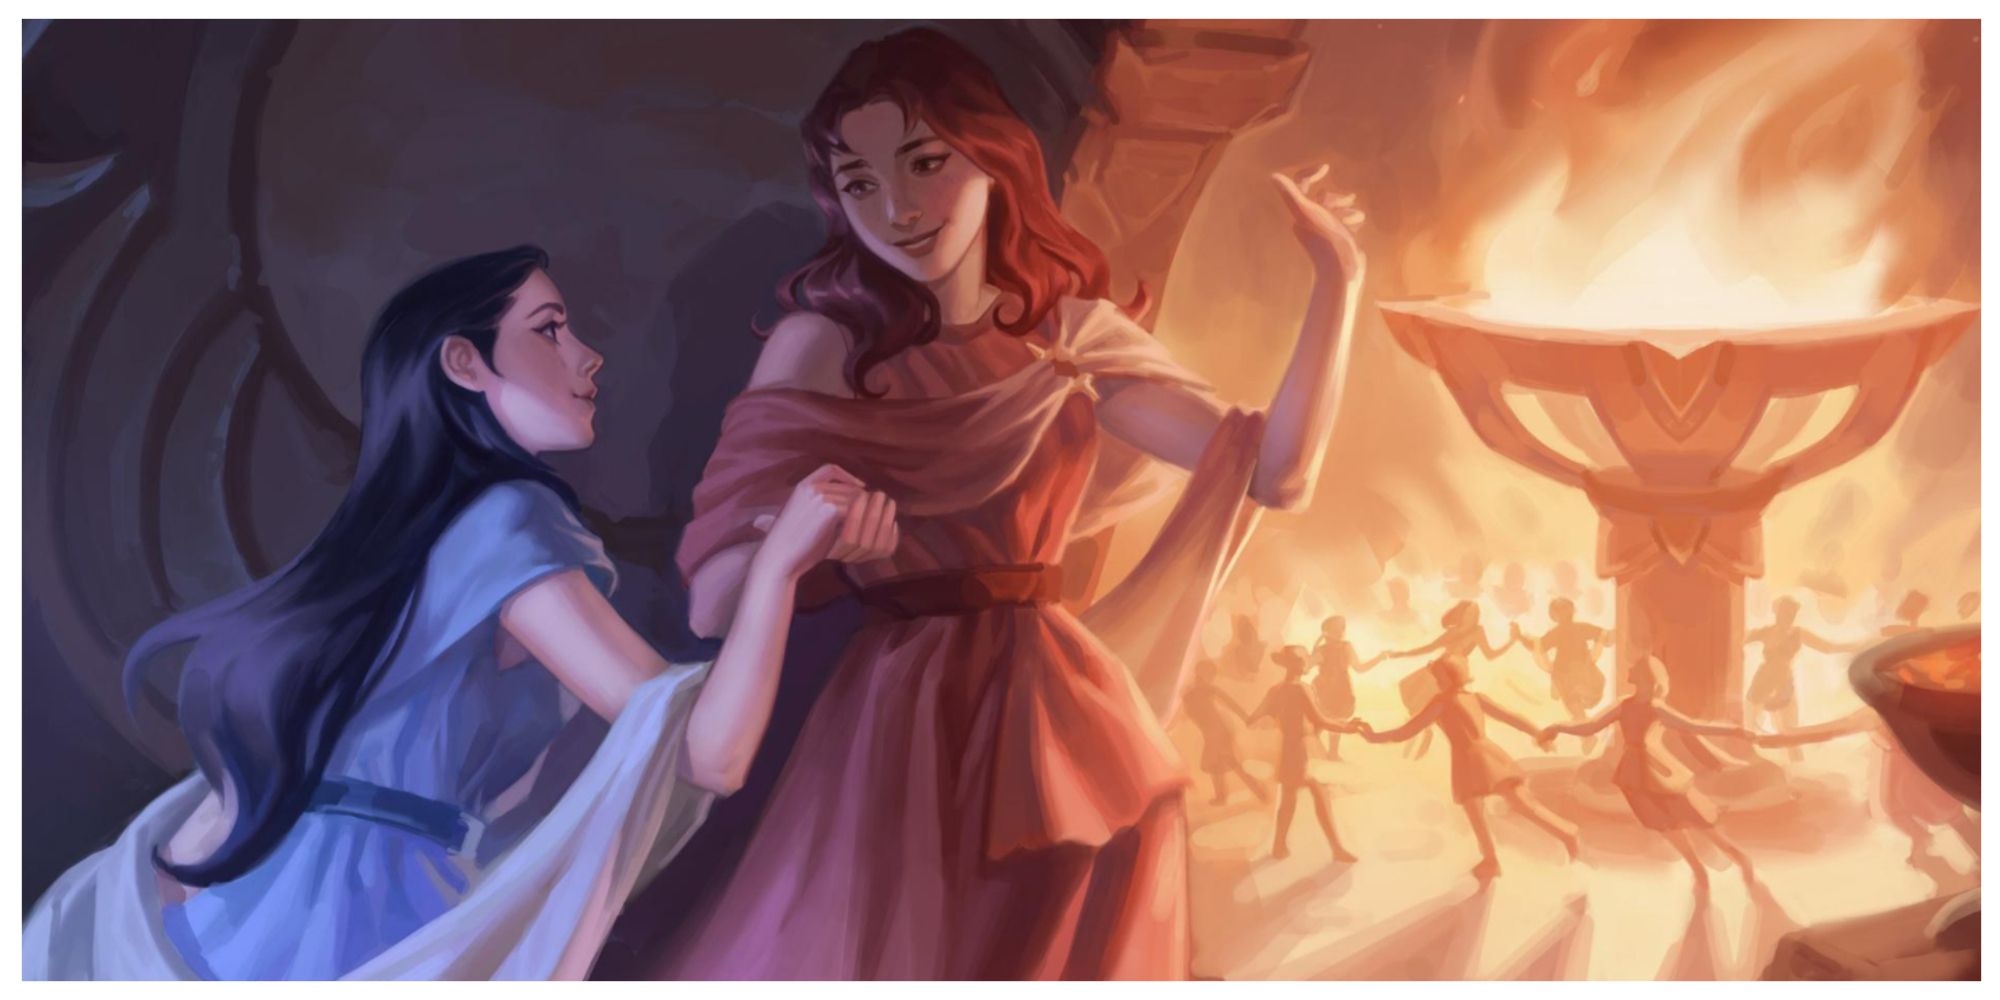 Leona and Diana when they were younger, holding hands to go dance by firelight during the festival of the Nightless Eve